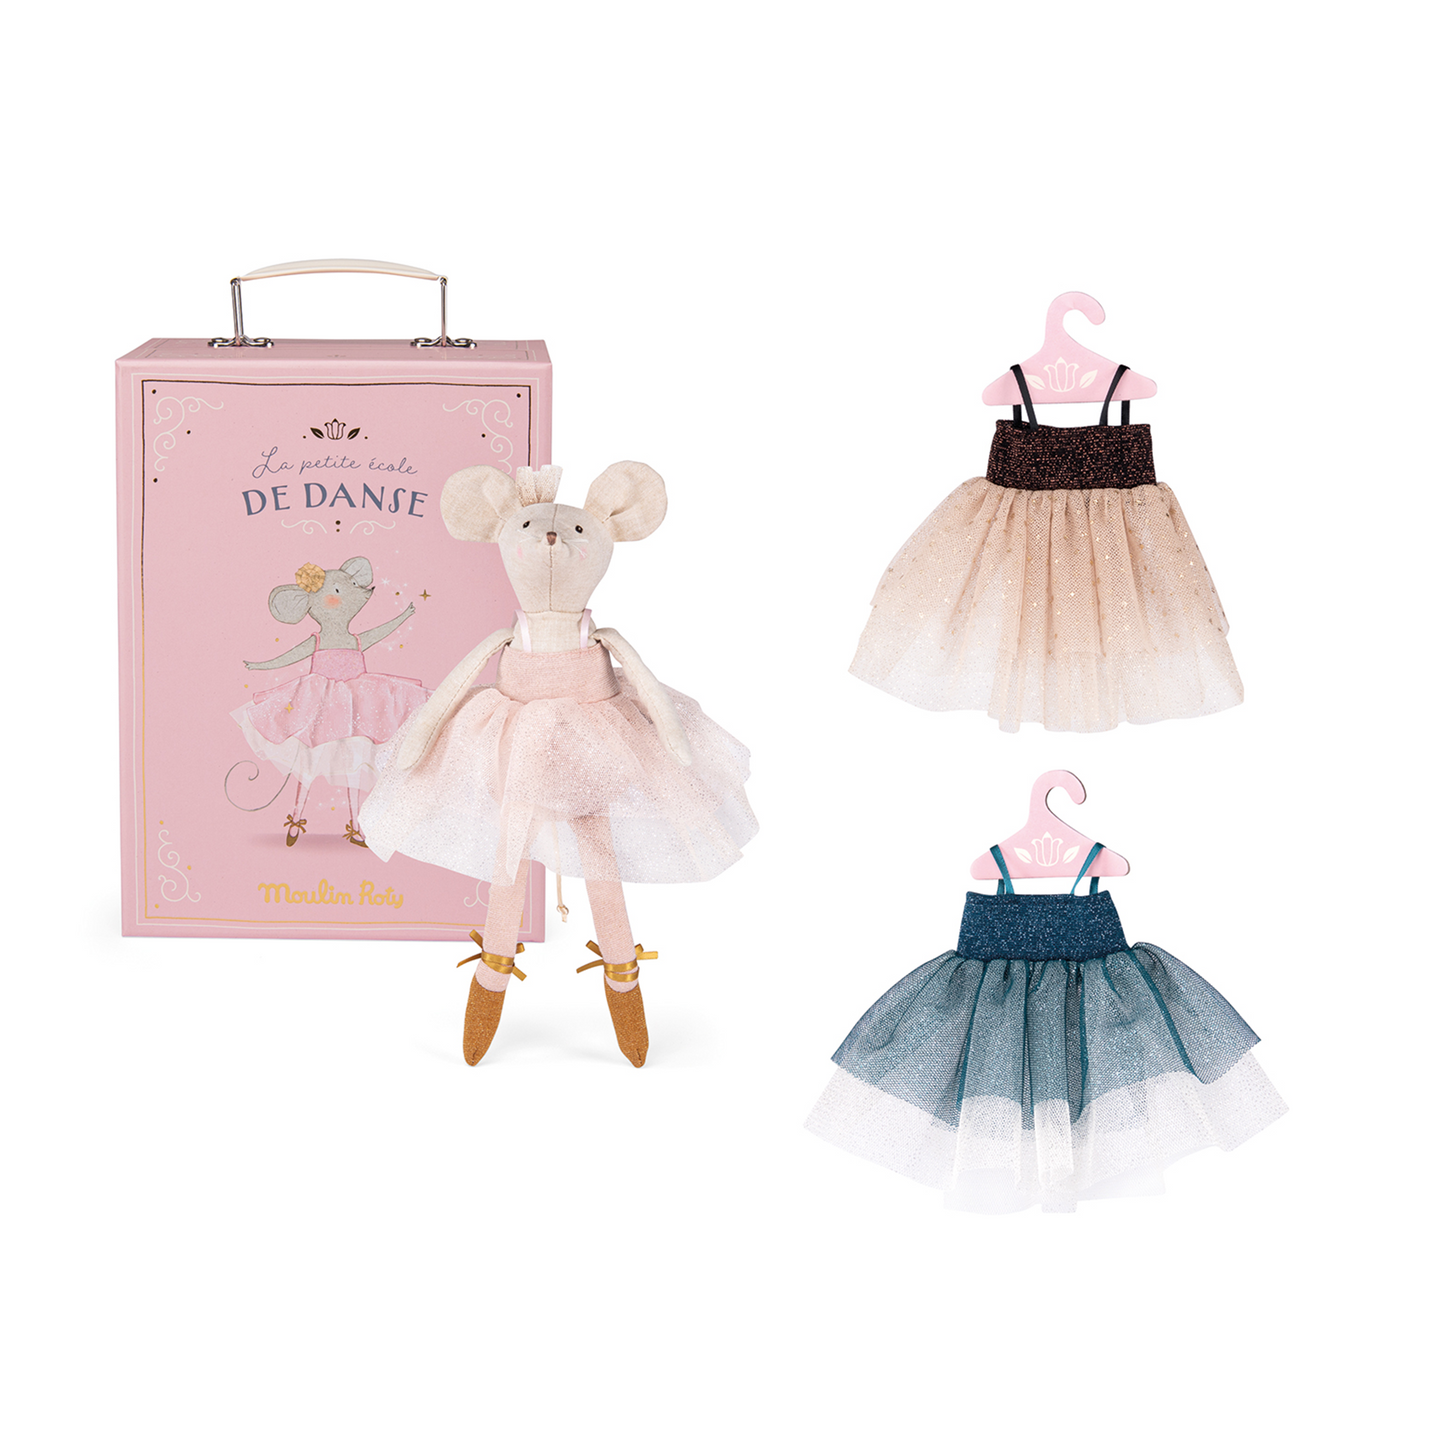 This adorable pink case includes a child-safe mirror, tutus to dress Ballerina Mouse in. Set includes: Ballerina Mouse doll, 3 hangers, 3 tutus, hanging rod.